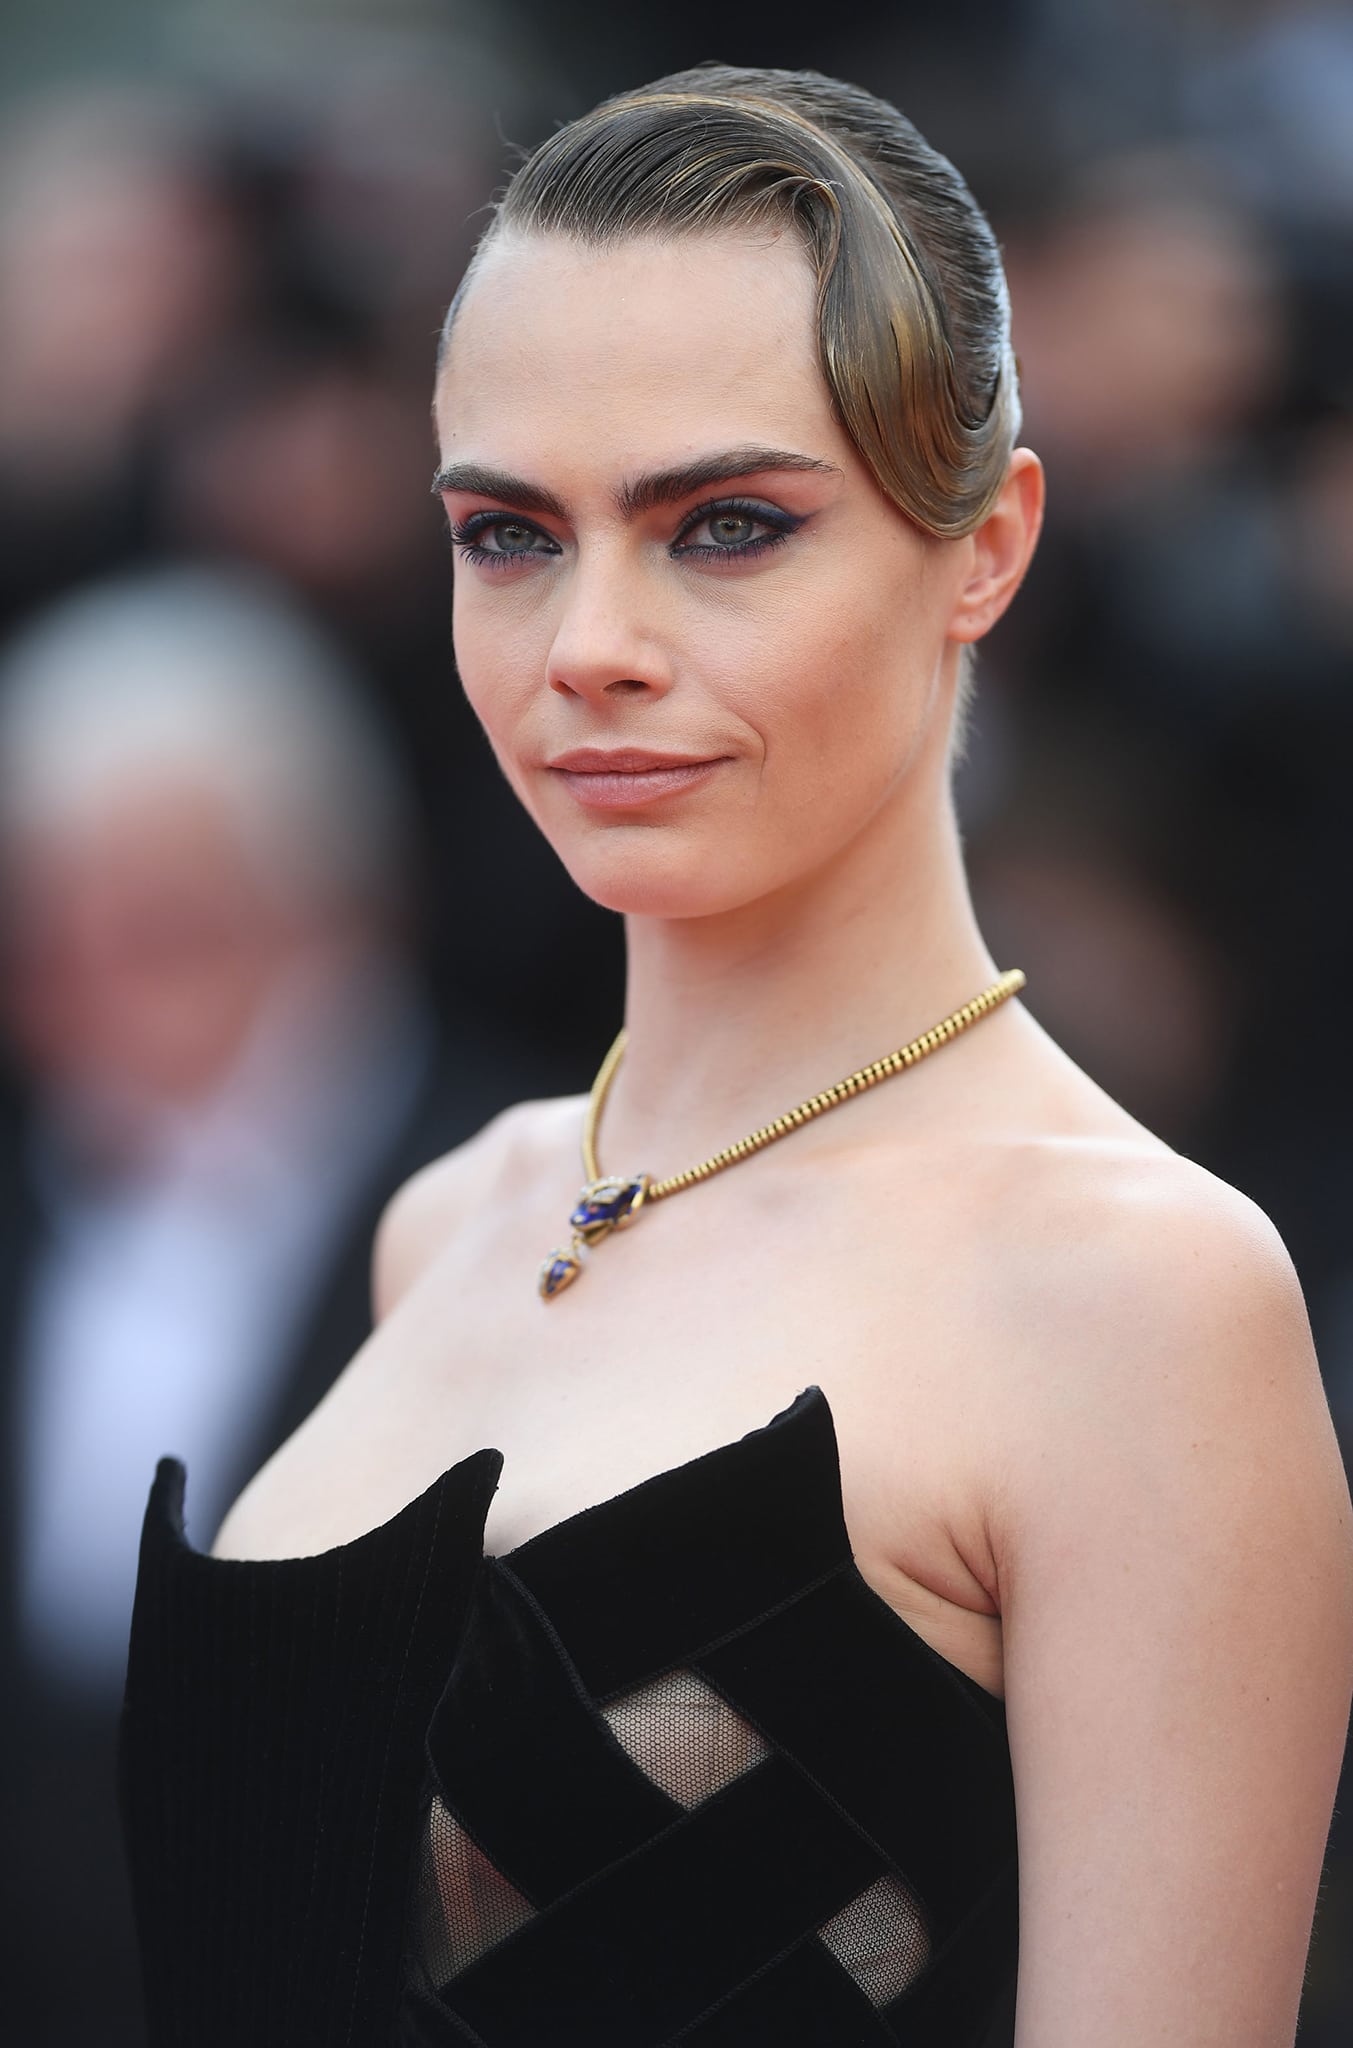 Cara Delevingne wears smokey eye-makeup and a slick 1920s finger wave hairstyle